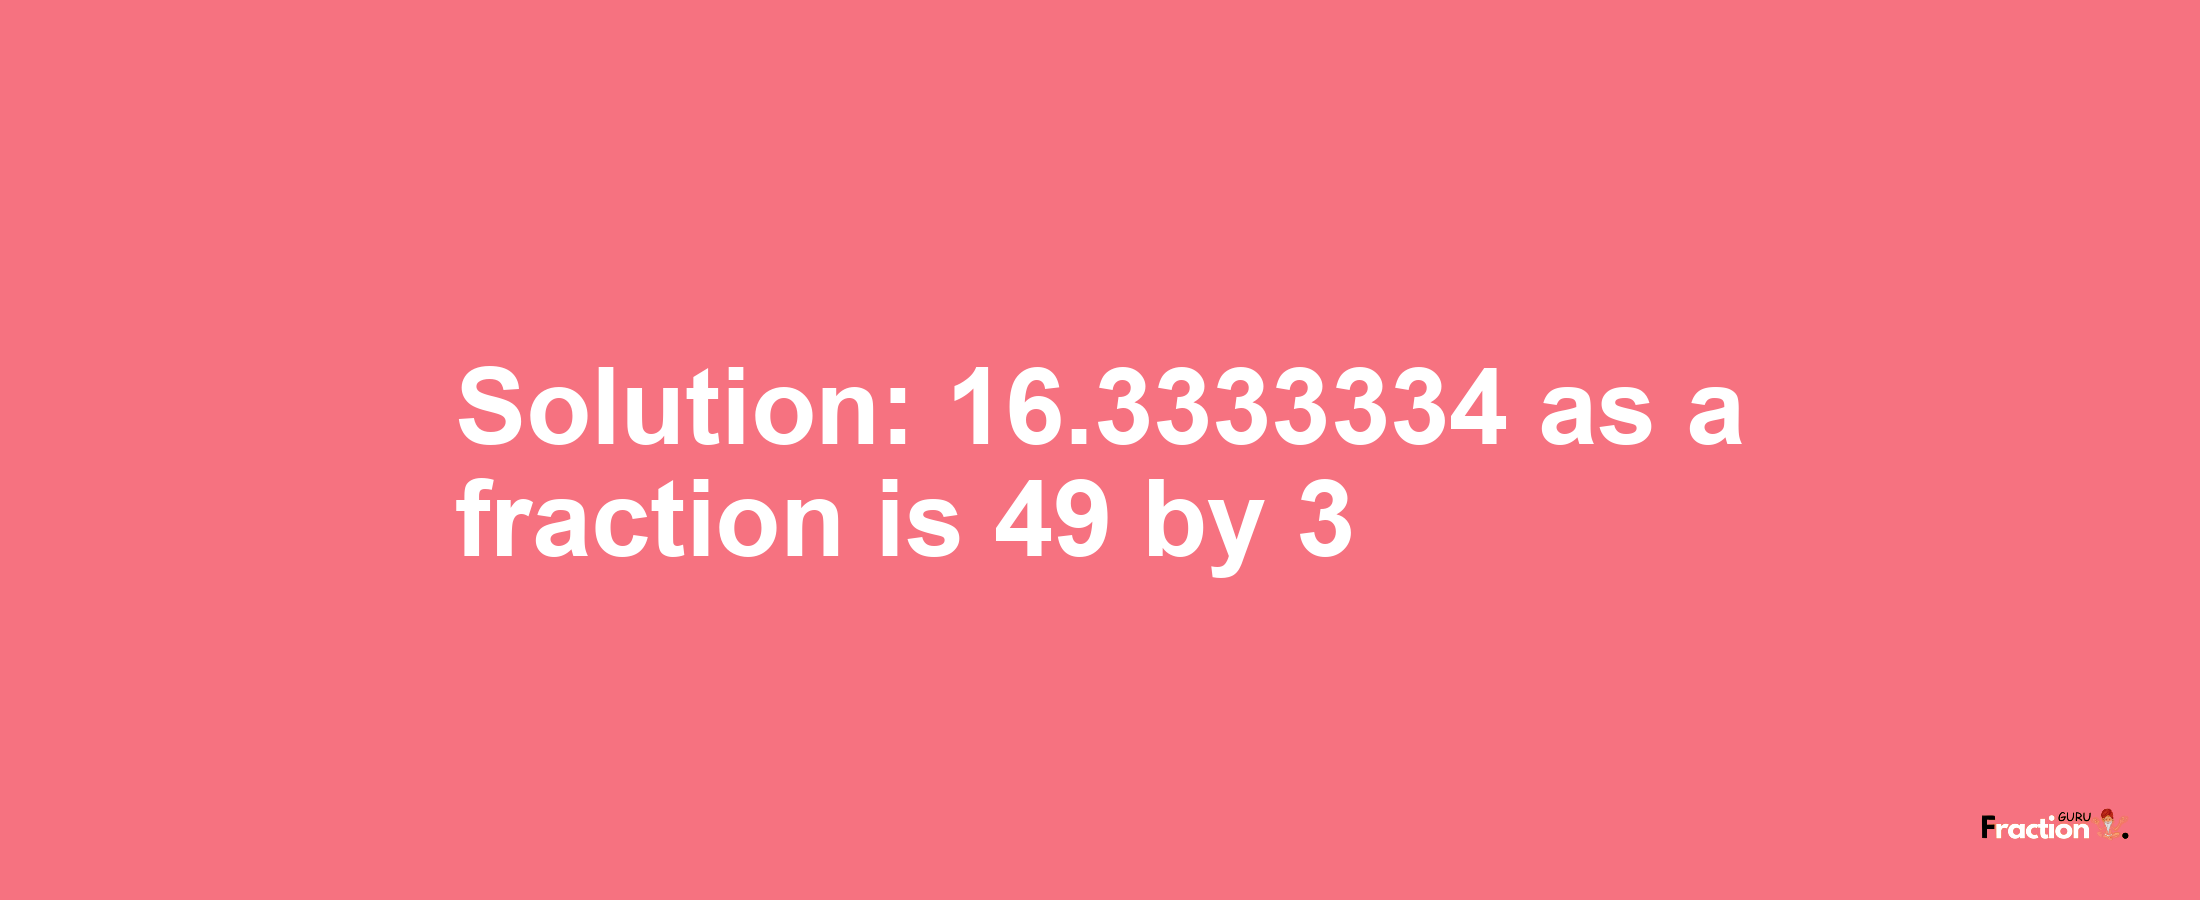 Solution:16.3333334 as a fraction is 49/3